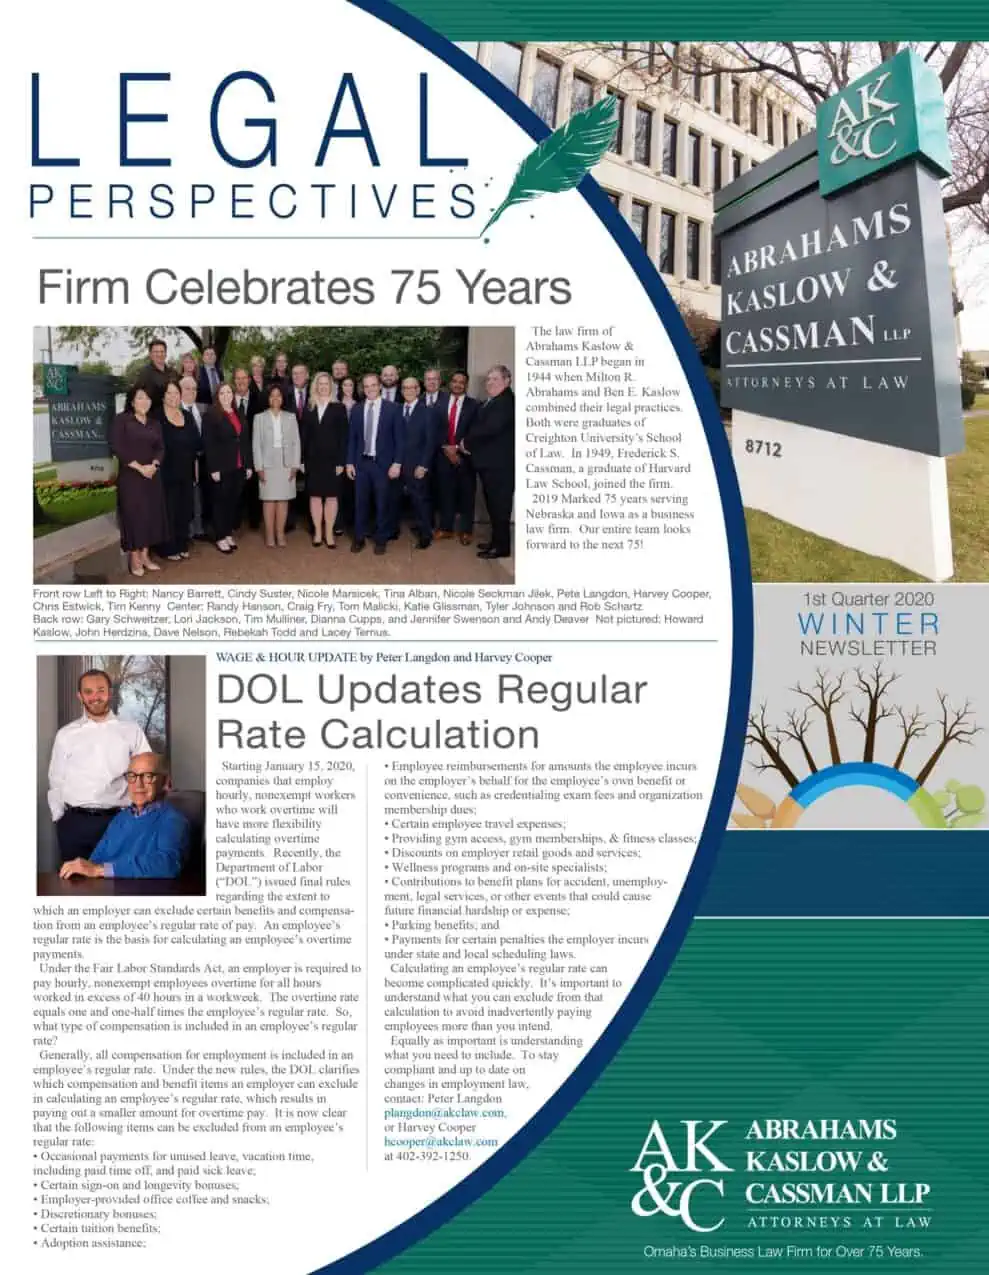 , AKC Law 2020 Winter Newsletter available now!, Abrahams Kaslow &amp; Cassman LLP | Attorneys at Law